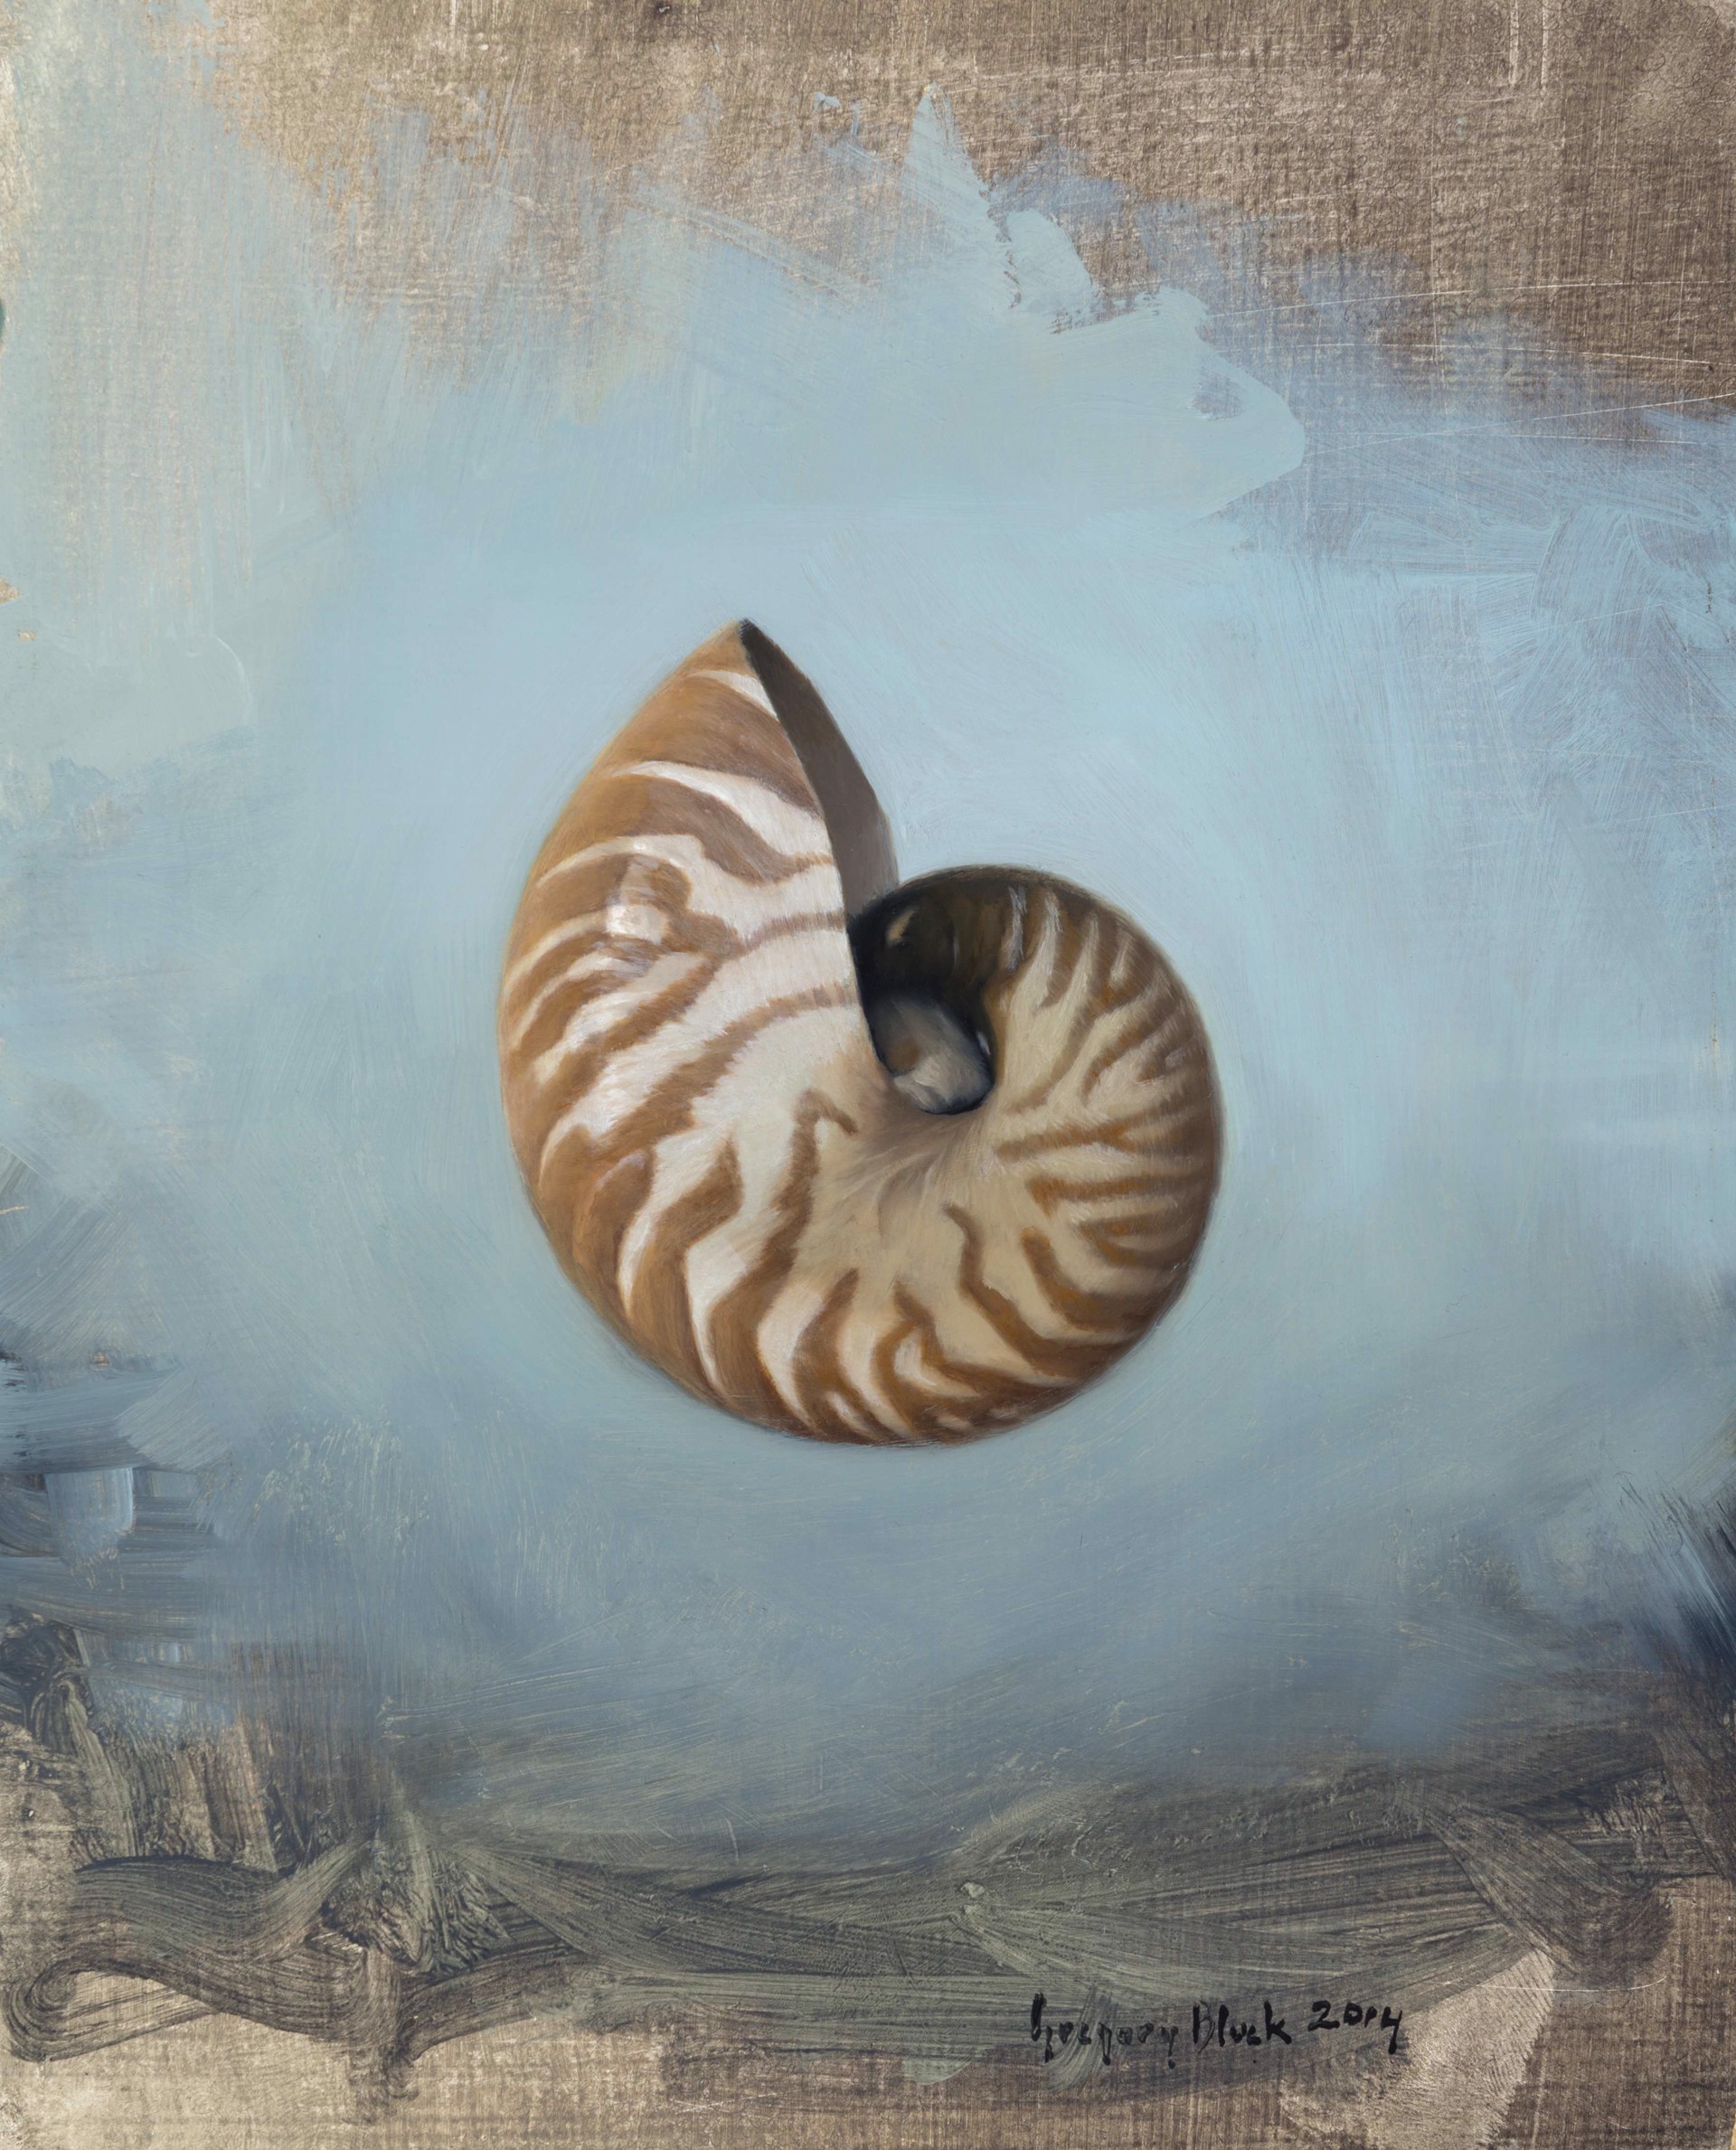 Shell by Gregory Block